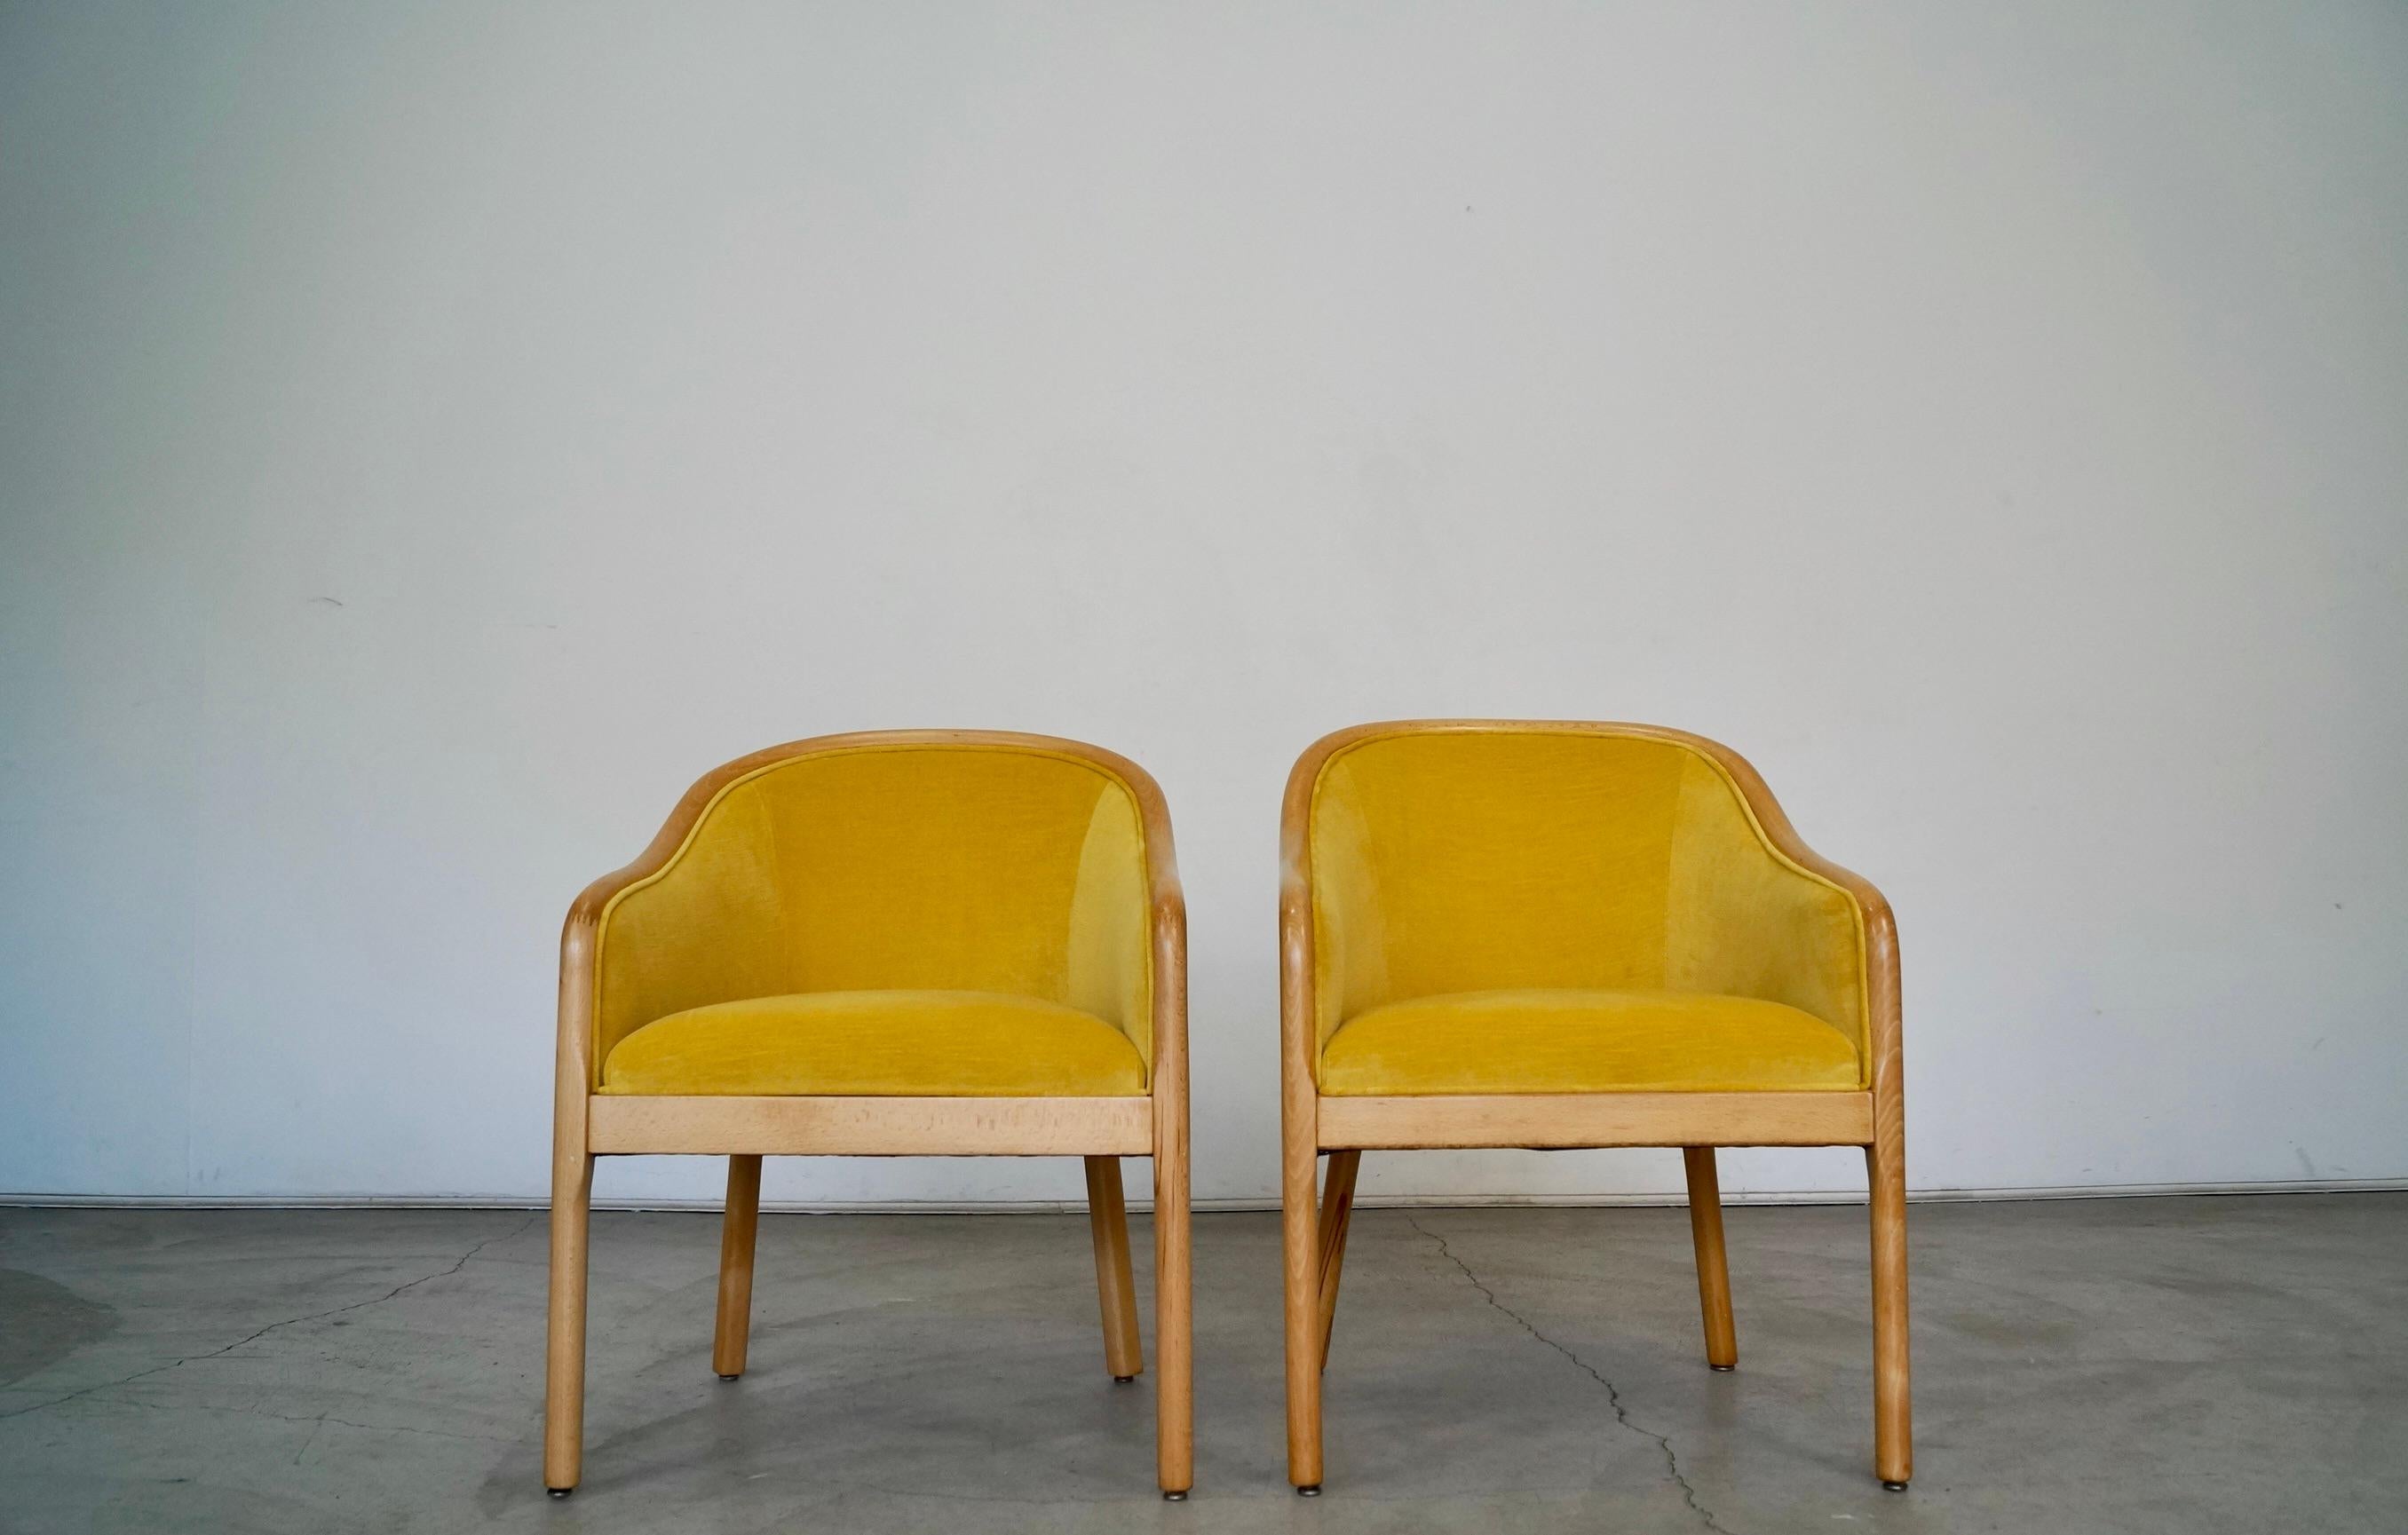 Pair of vintage 1970s arm chairs for sale. They have been professionally restored. They have been refinished in a natural beech finish, and reupholstered in new velvet and foam. The velvet is a gold yellow tone and goes beautifully with the natural